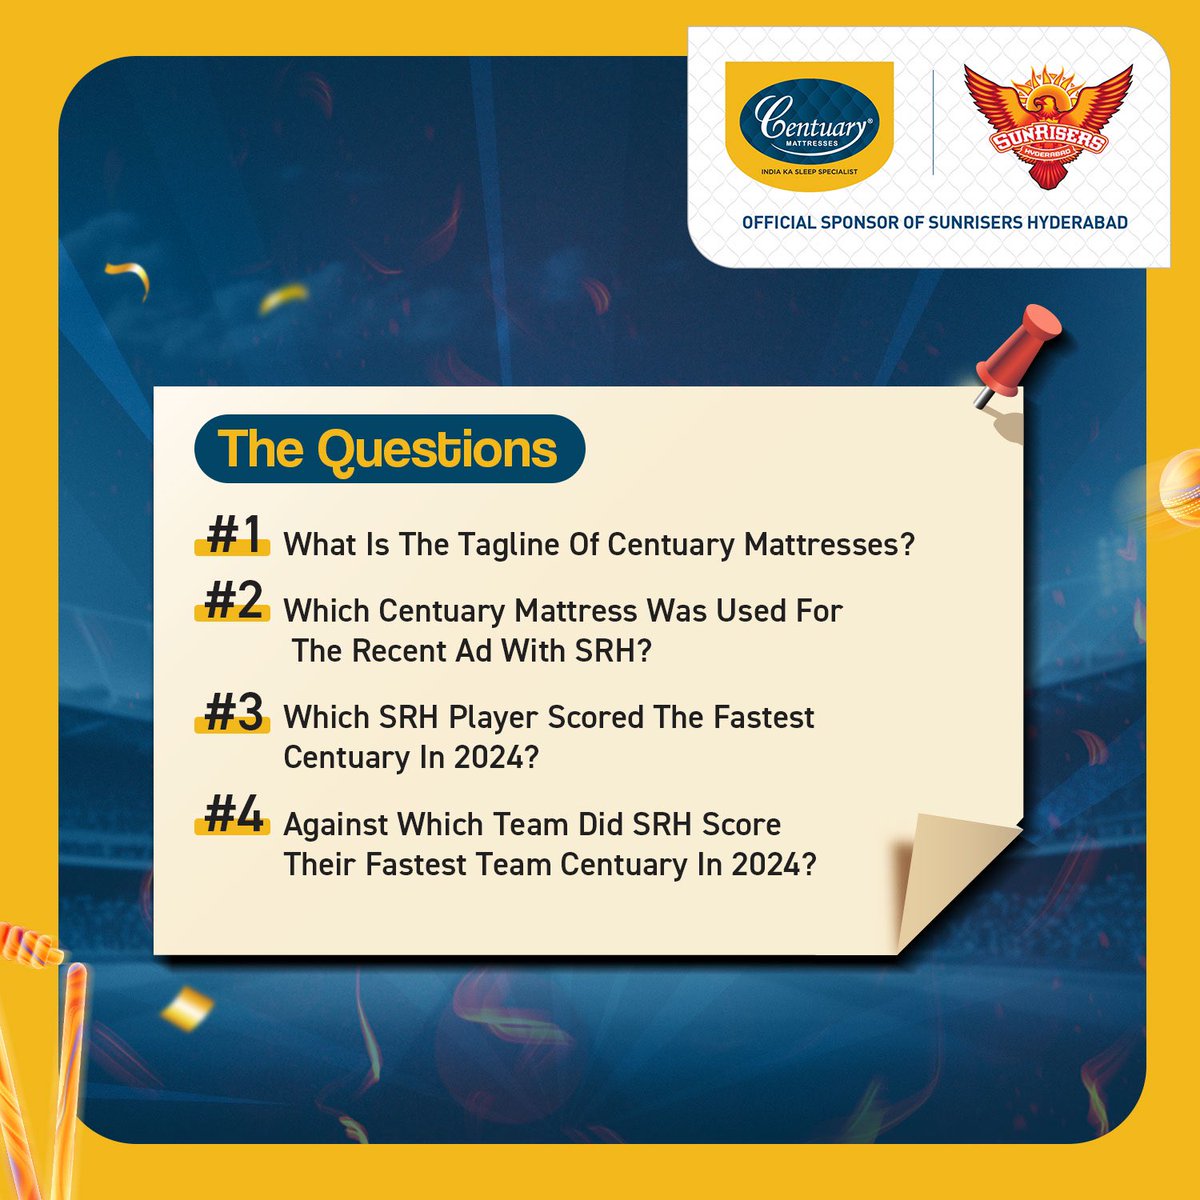 🚨 Contest Alert 🚨 Centuary Mattresses - The Official Sponsor of the @sunrisershyd is giving YOU 🫵 a chance to witness the #OrangeArmy live.🏏 ✅Answer these simple questions and follow @CentuaryKiSleep along with 3 friends - and you could win free tickets to the game!🎟️